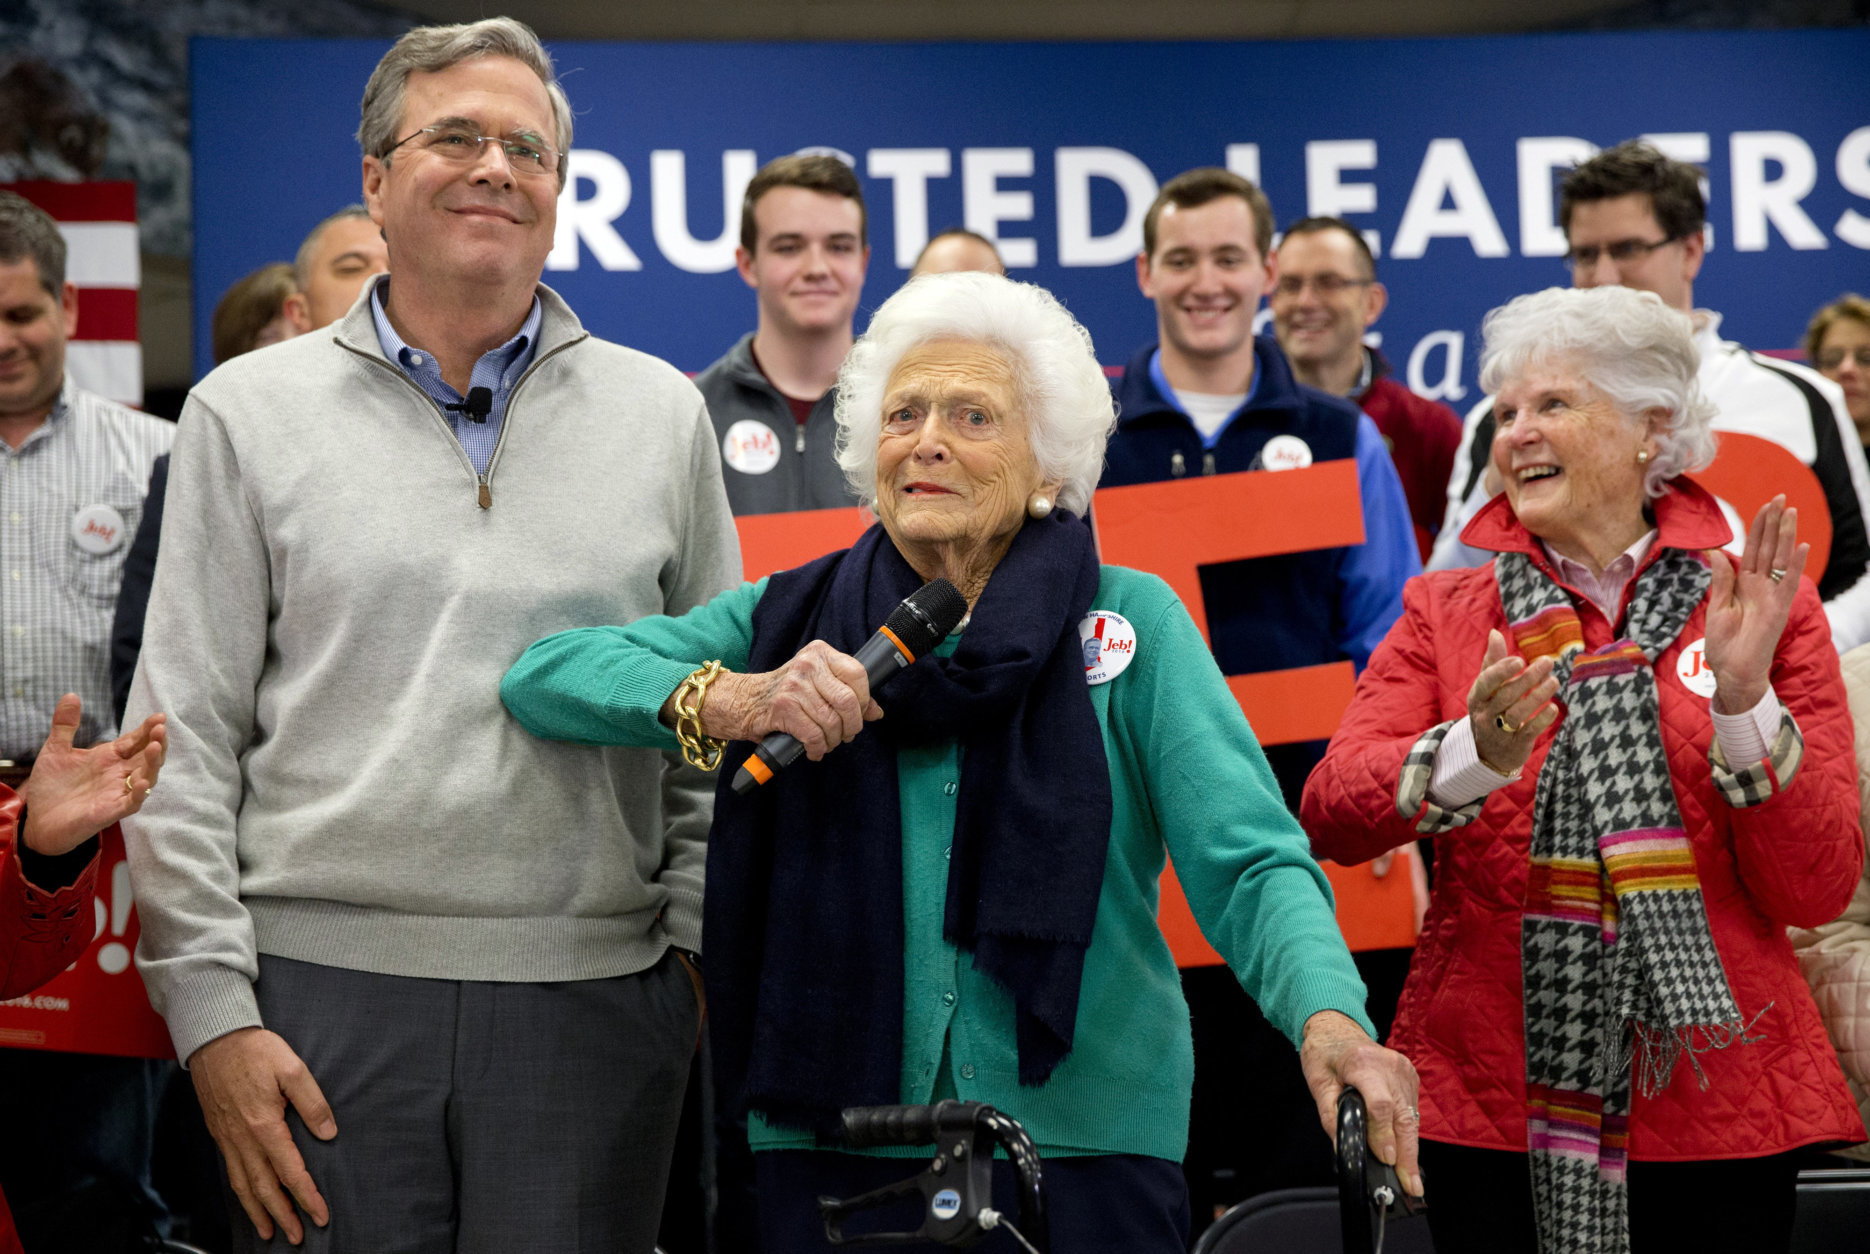 Barbara Bush, center, jokes with her son, Republican presidential candidate, former Florida Gov. Jeb Bush, while introducing him at a town hall meeting at West Running Brook Middle School in Derry, N.H., Thursday Feb. 4, 2016. (AP Photo/Jacquelyn Martin)